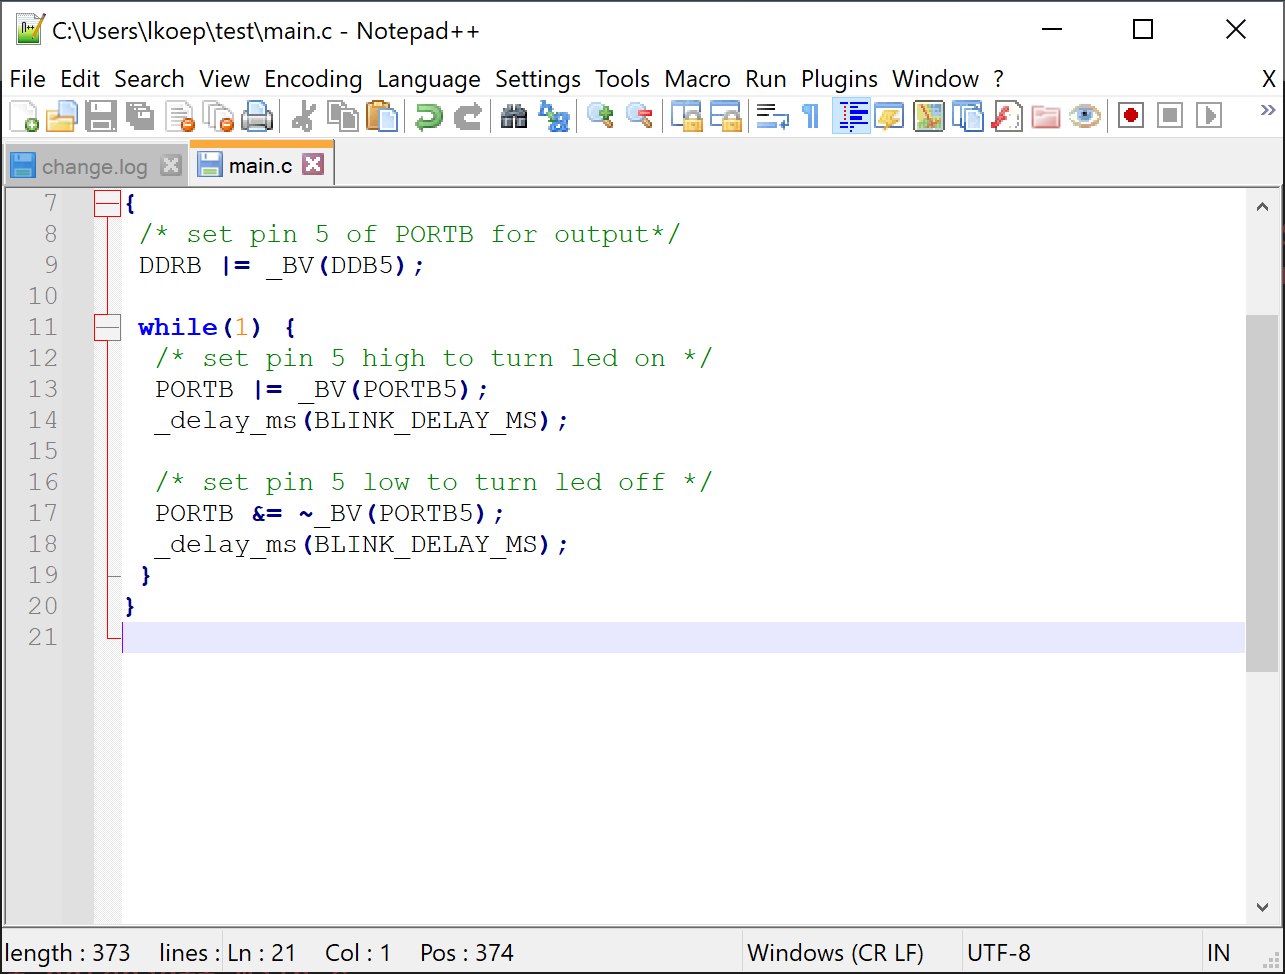 main.c in the Notepad++ editor